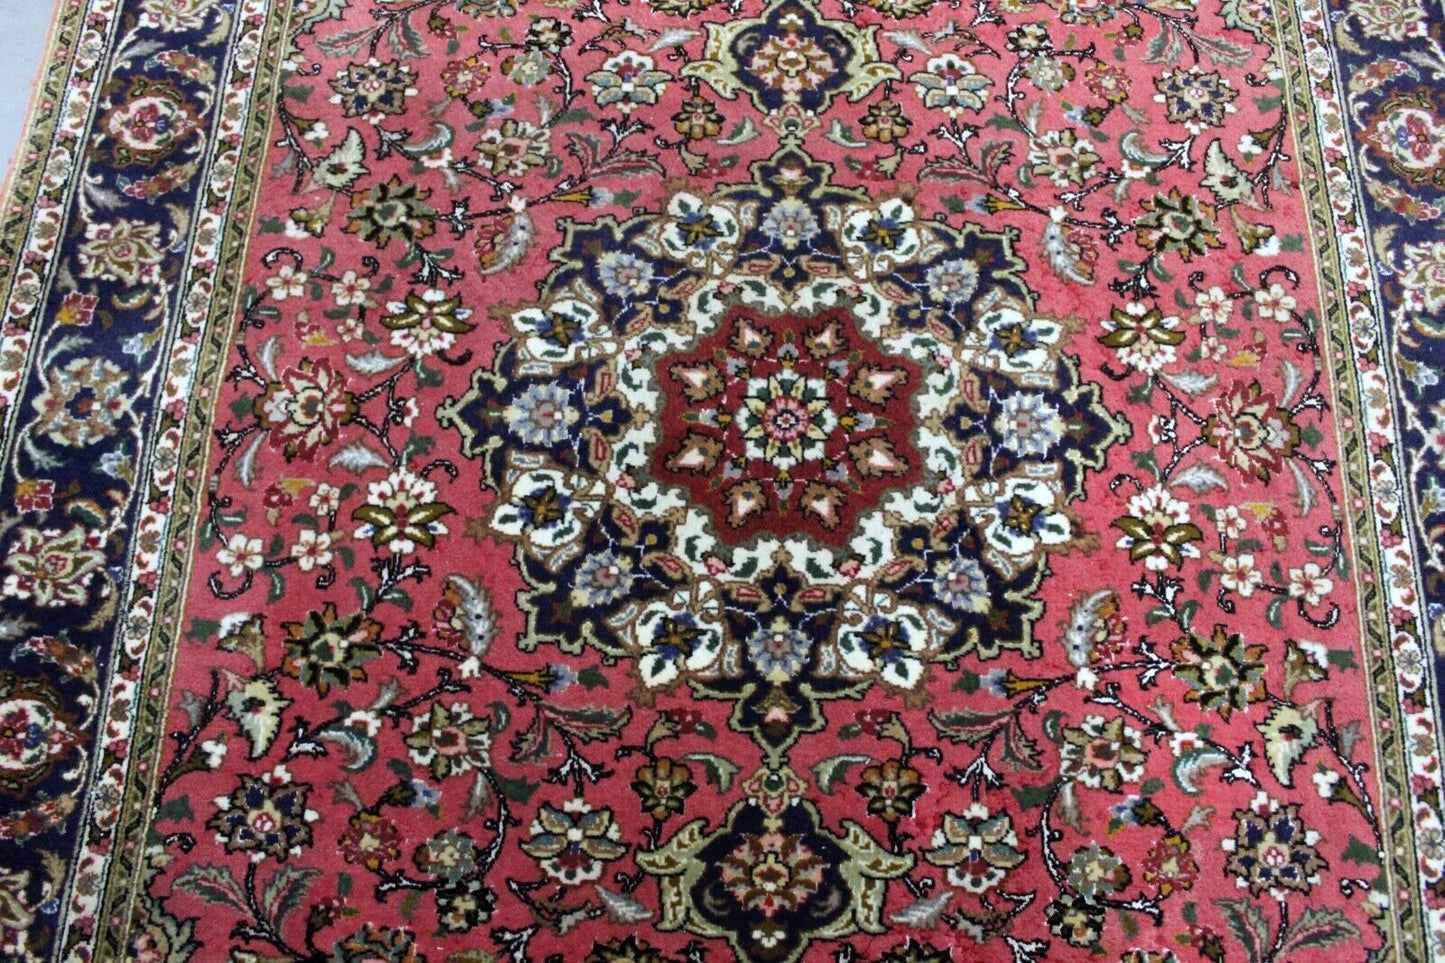 Close-up of floral motifs on Handmade Vintage Persian Tabriz Rug - Delicate flowers and vines intertwined in rich reds, blues, and greens.